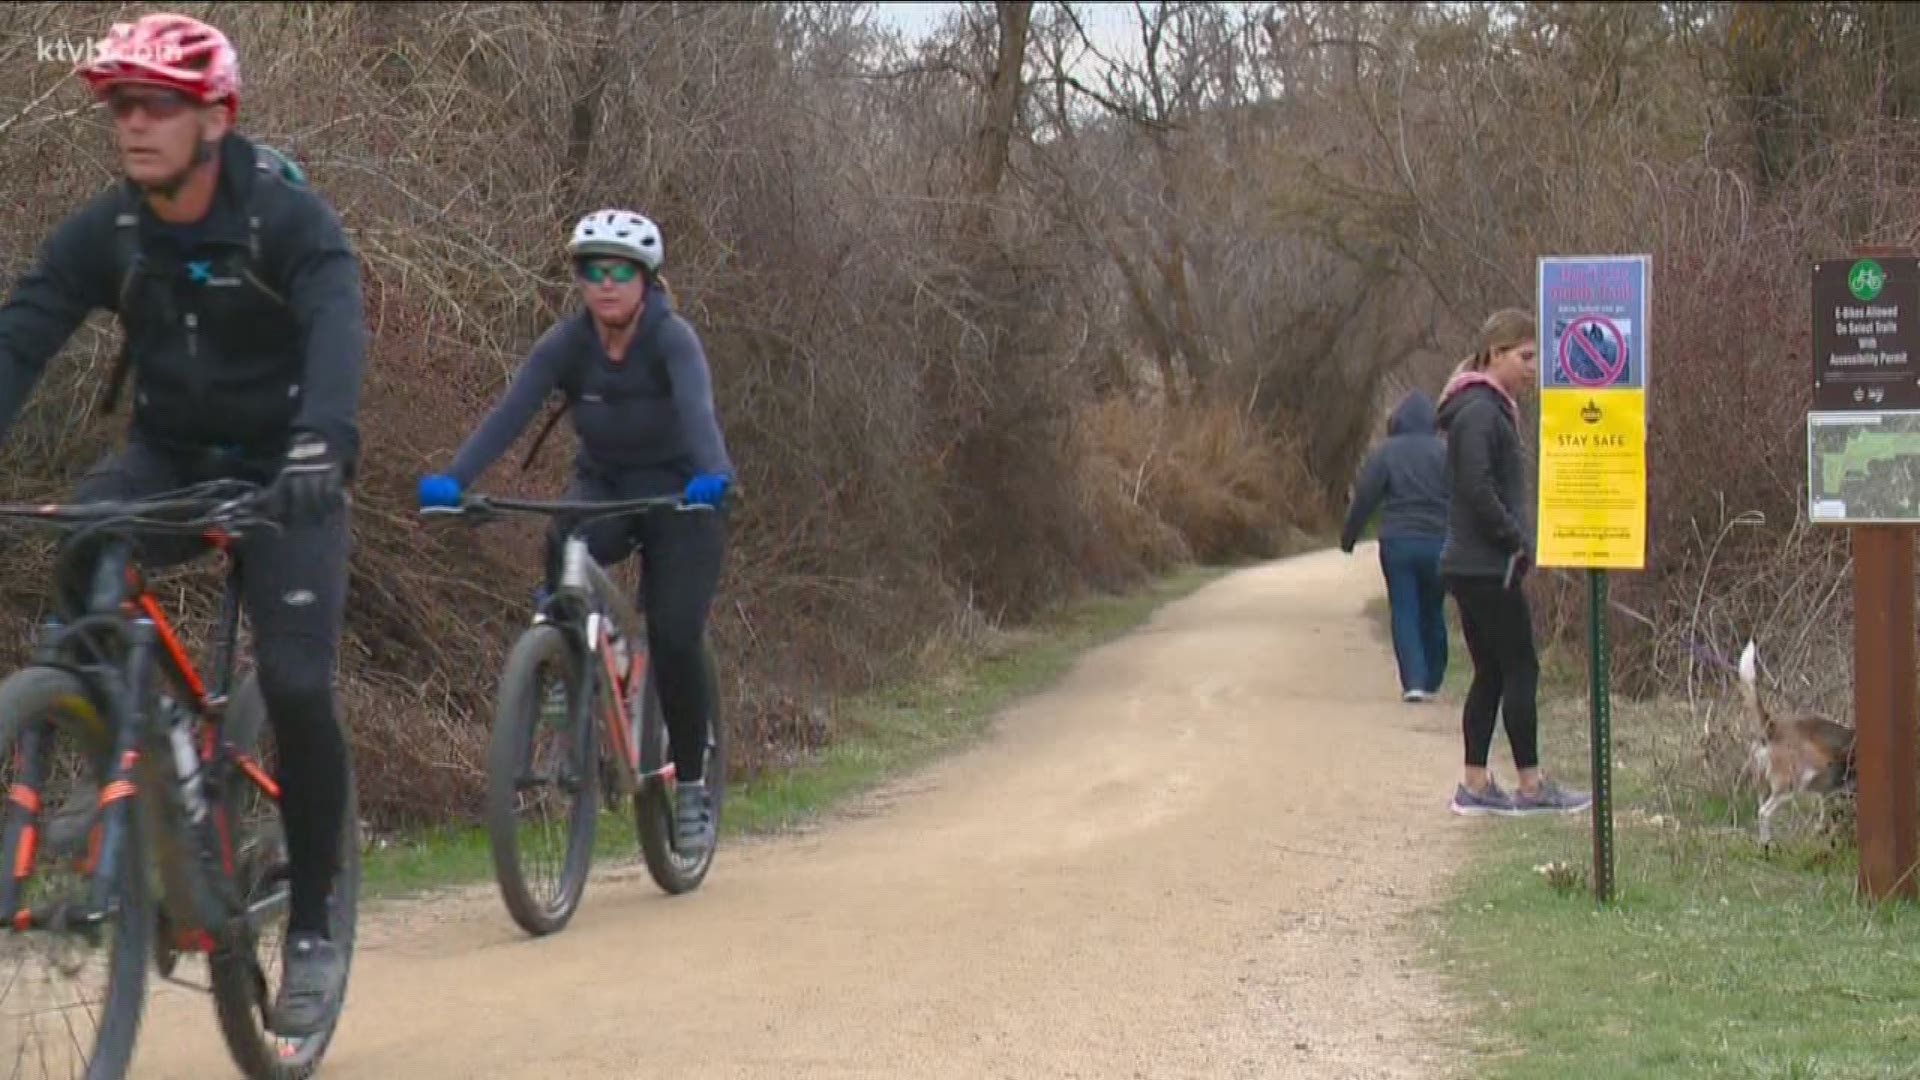 If people follow the guidelines, Boise Parks and Rec won't have any reason to close down the Greenbelt or trails, according to the Boise Parks and Rec's director.